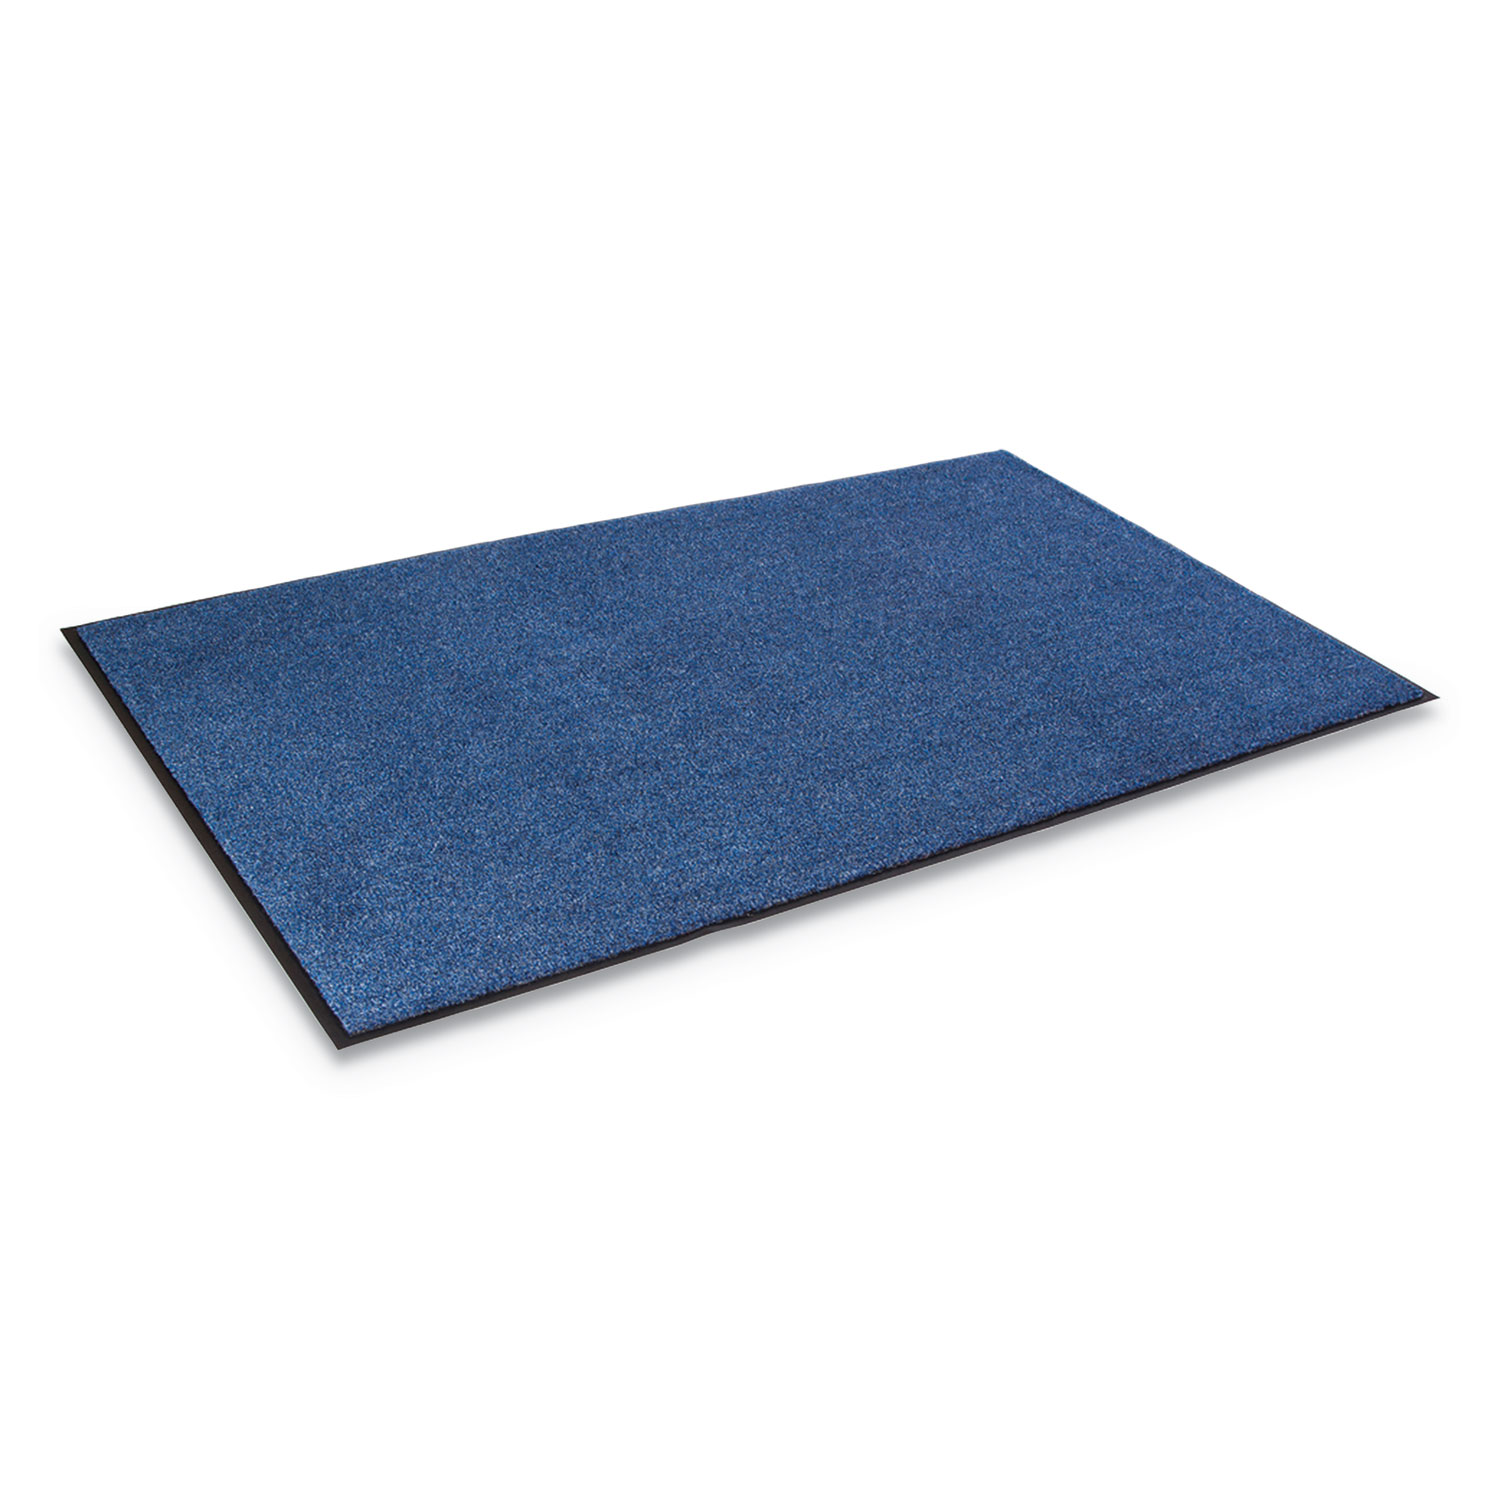  Crown GS 0046MB Rely-On Olefin Indoor Wiper Mat, 48 x 72, Marlin Blue (CWNGS0046MB) 